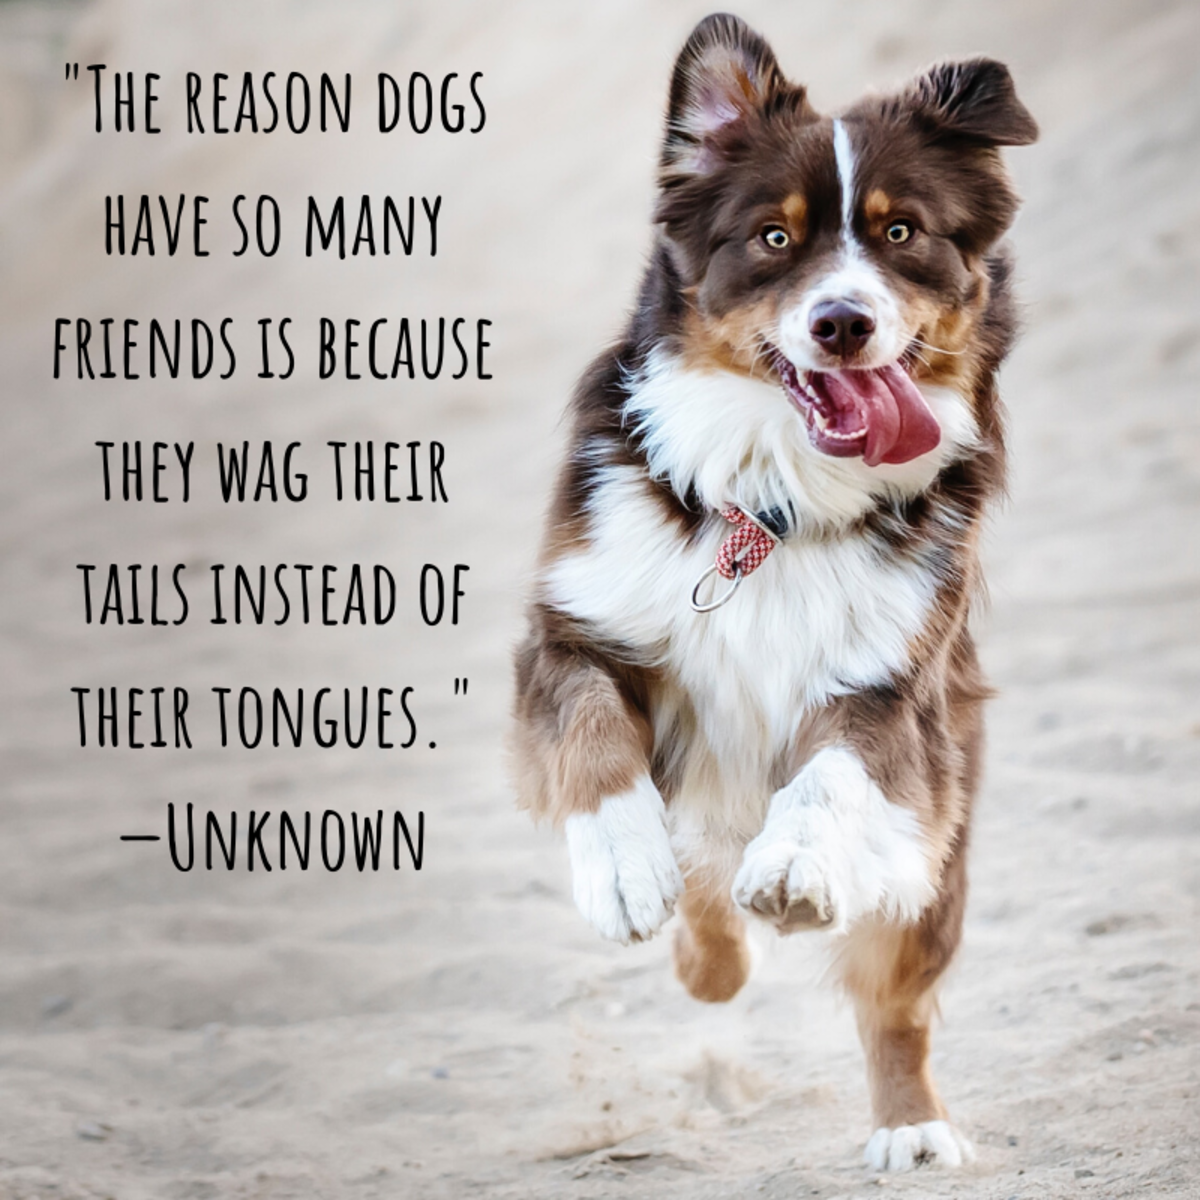 "The reason dogs have so many friends is because they wag their tails instead of their tongues." —Unknown